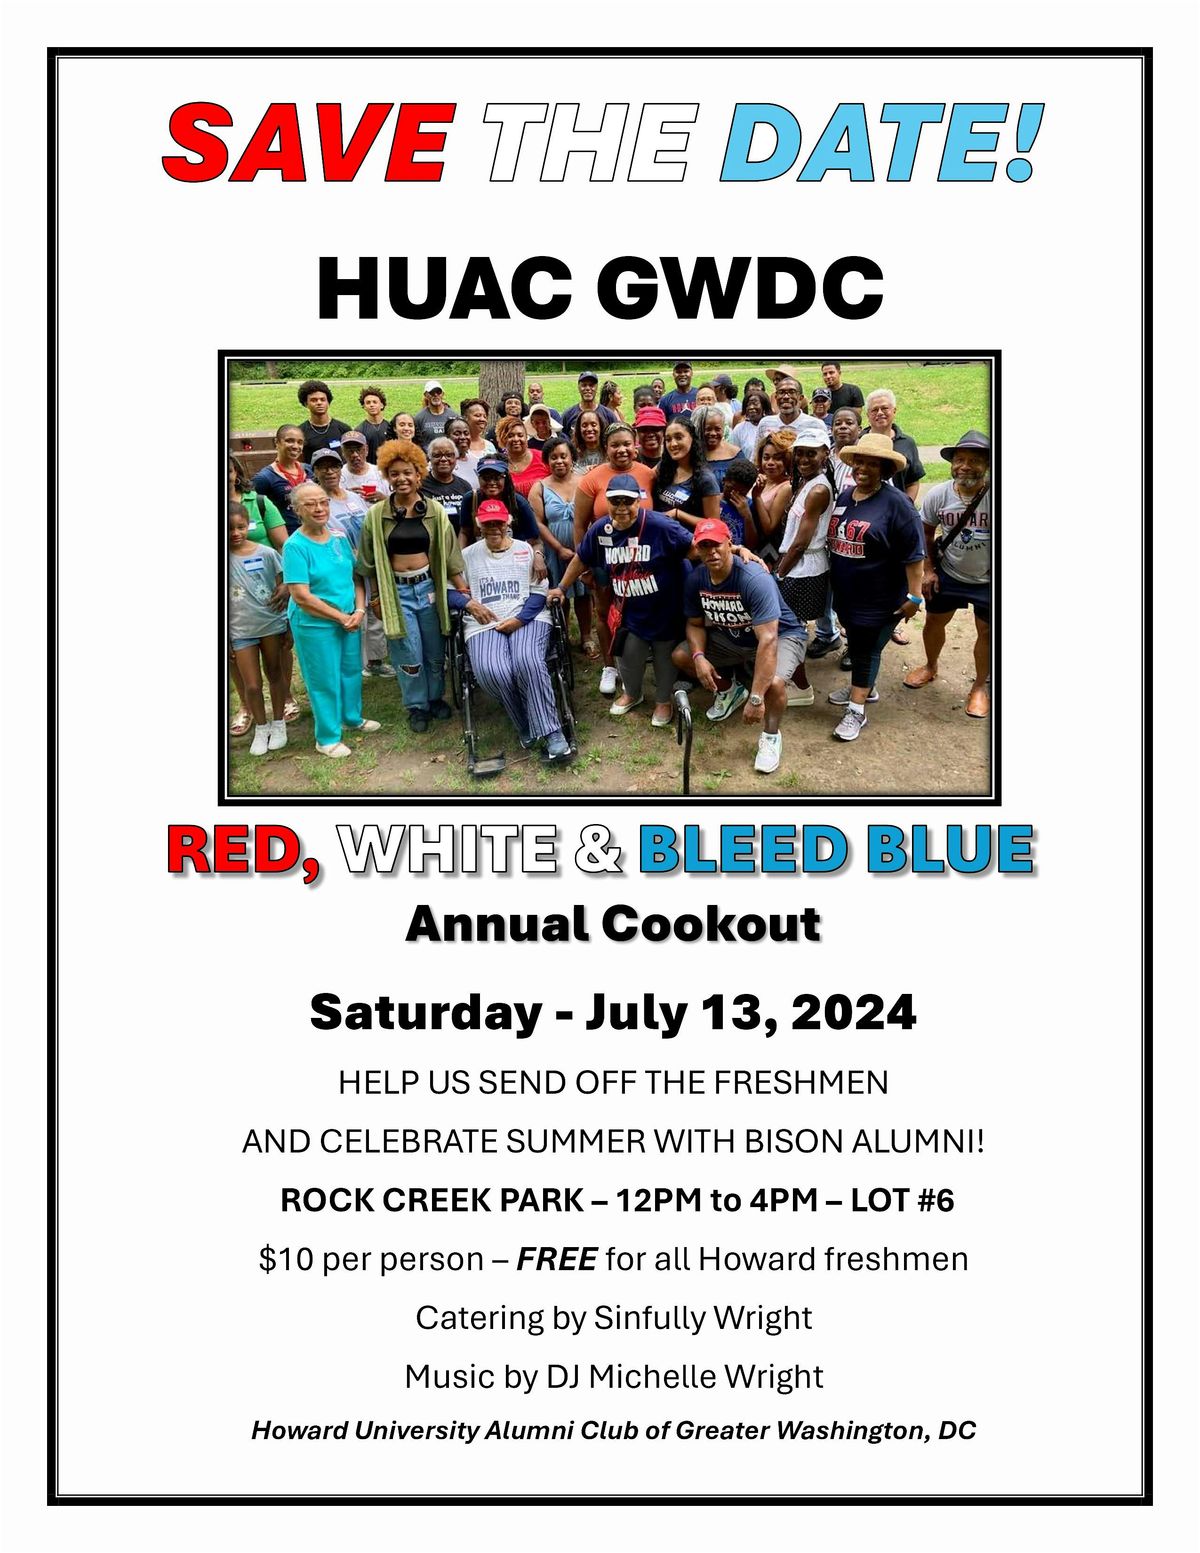 HUAC GWDC Red, White & Bleed Blue Annual Cookout and Freshmen Sendoff